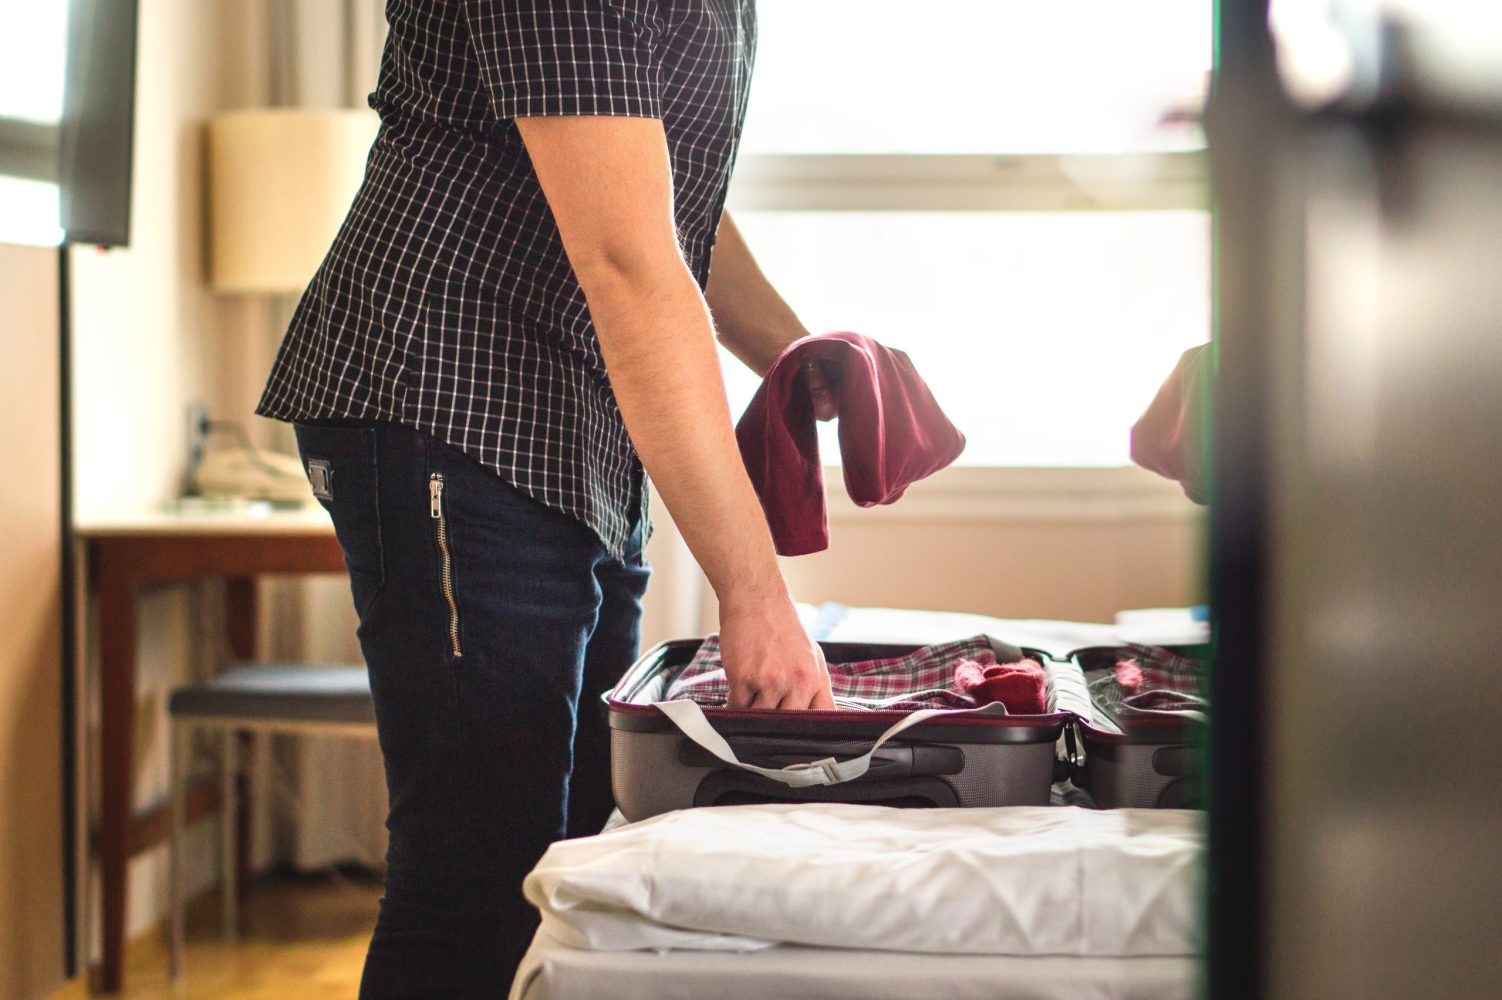 Man packing suitcase for vacation. Person putting clothes to baggagge in hotel room or home bedroom. Traveler with open luggage on bed. Holding t-shirt in hand. Going on or leaving from holiday.